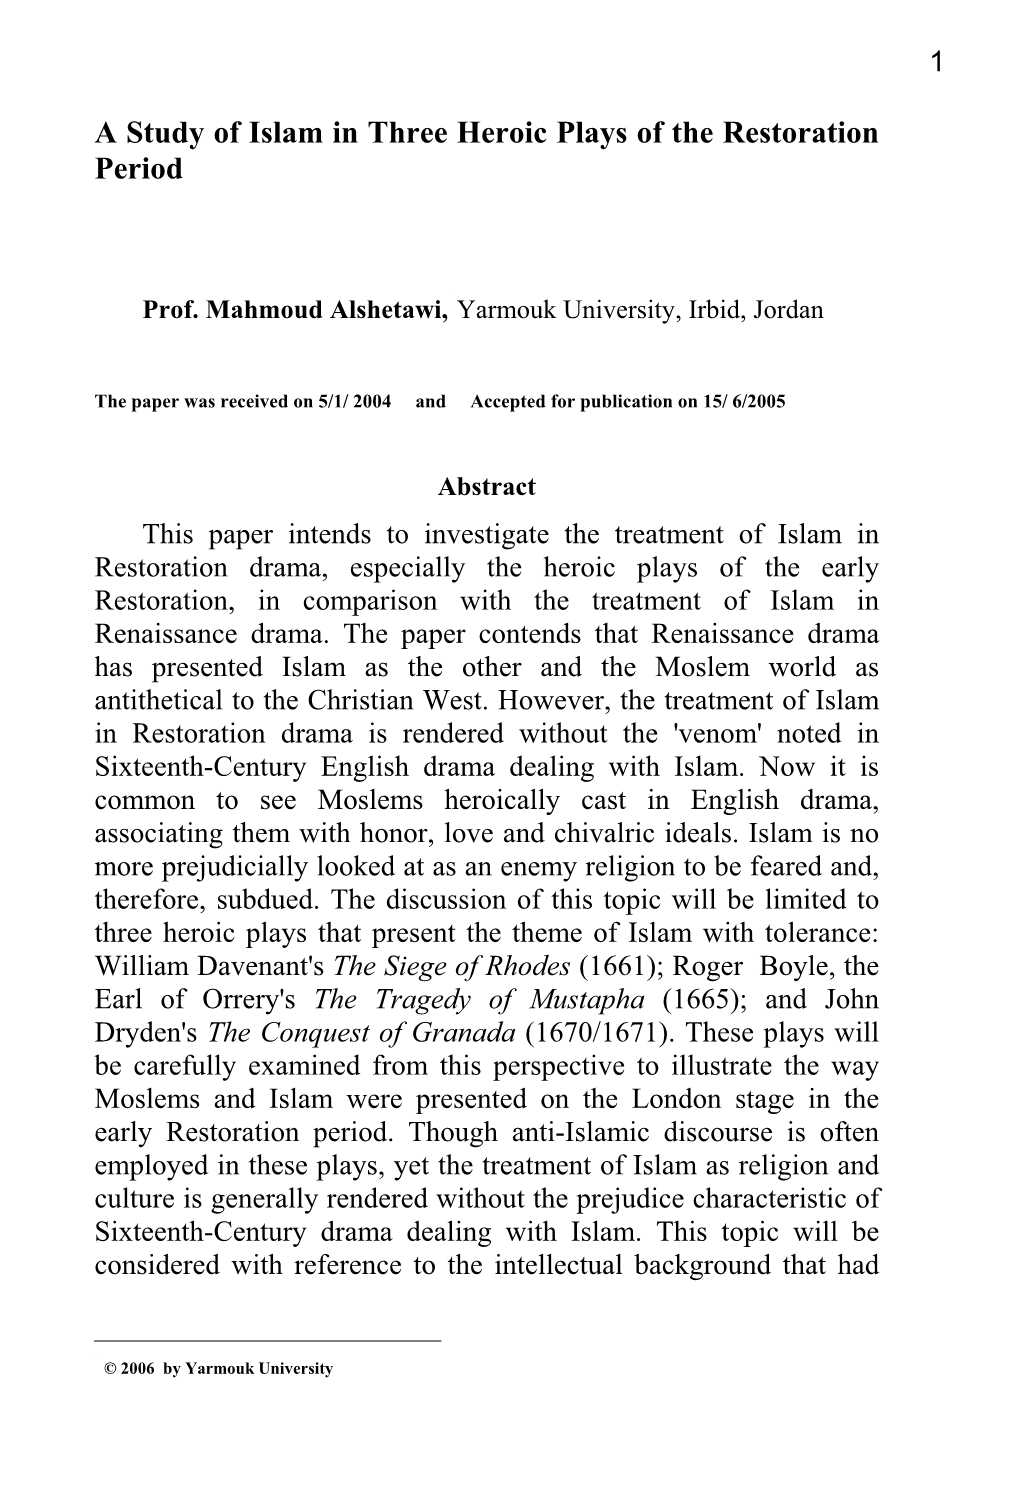 A Study of Islam in Three Heroic Plays of the Restoration Period